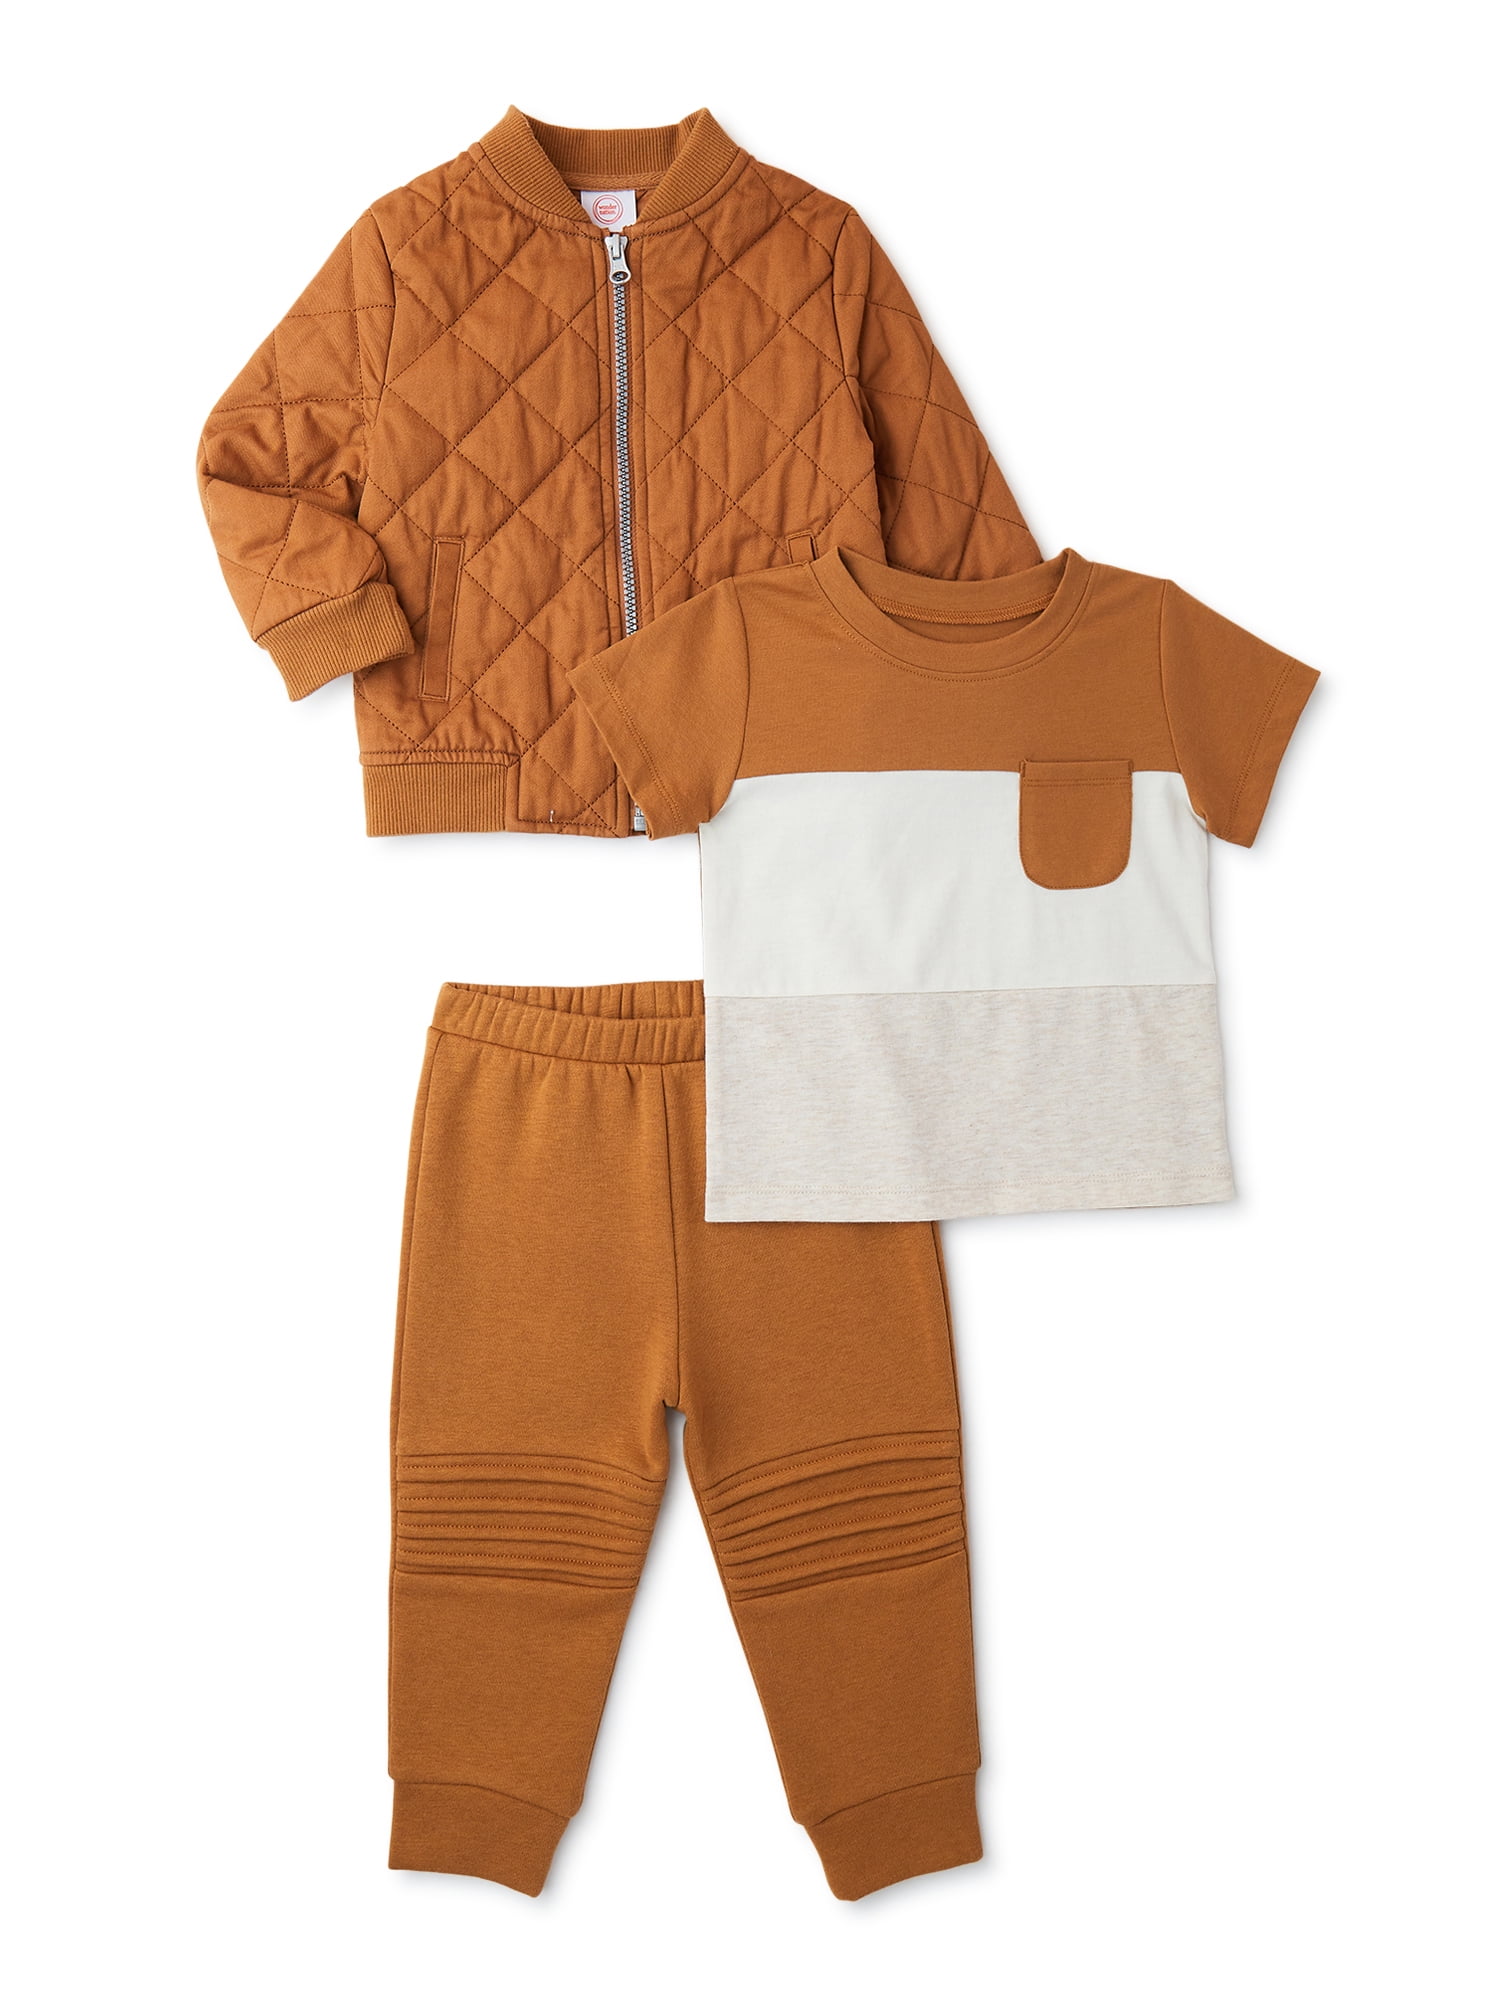 Wonder Nation Baby Boys Quilted Bomber Jacket, Joggers and T-Shirt, 3 Piece Outfit Set, Sizes 0/3-24 Months